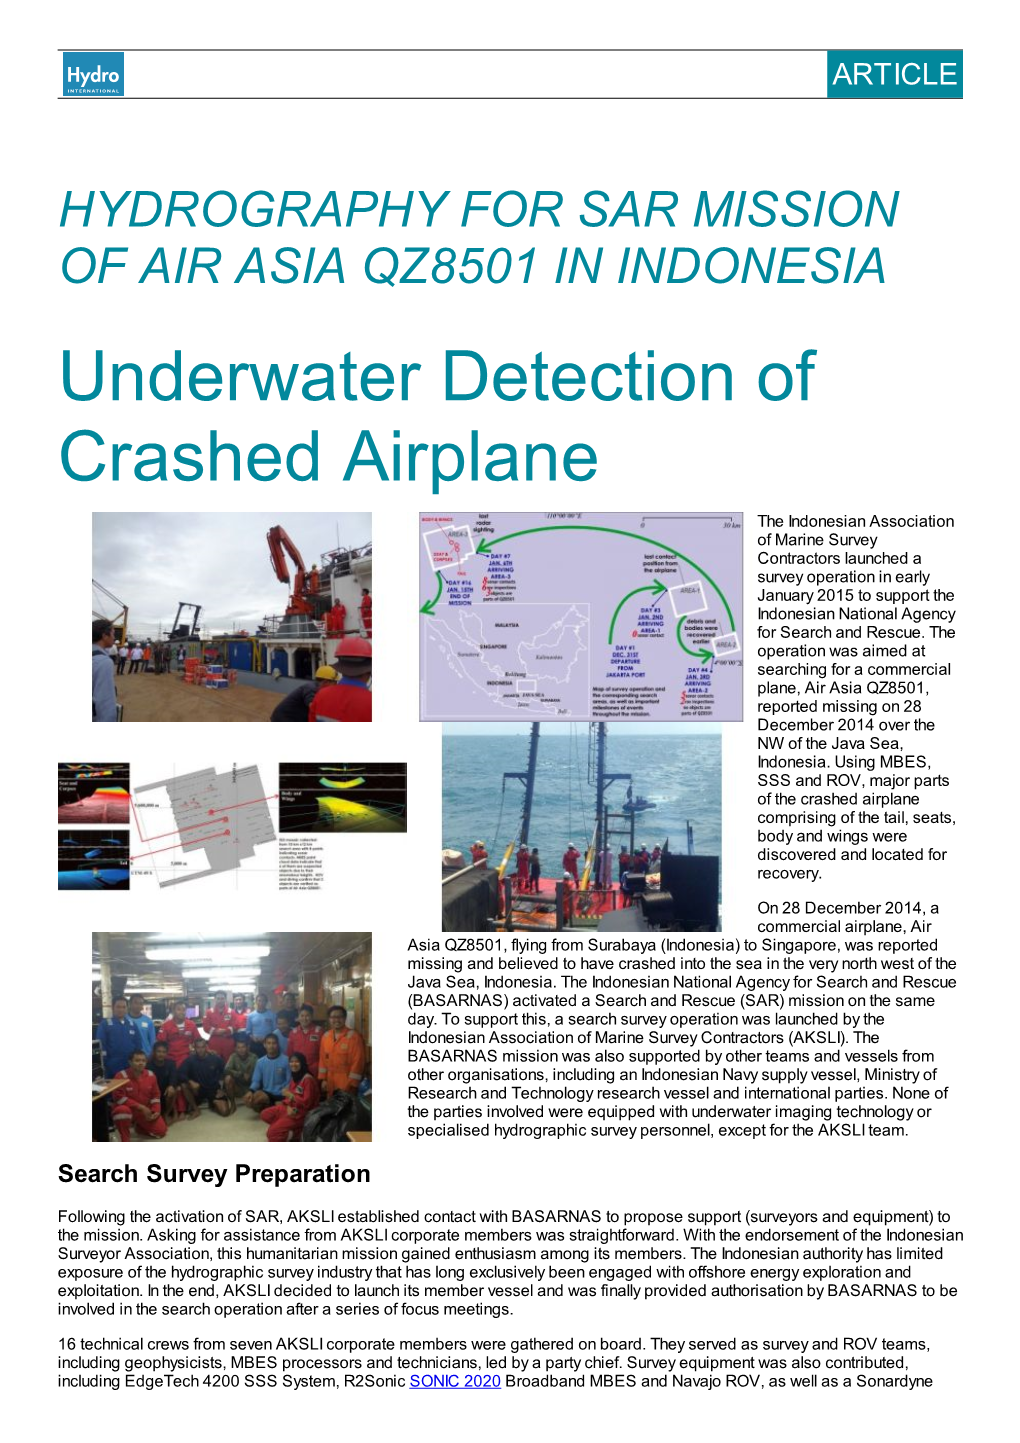 Underwater Detection of Crashed Airplane